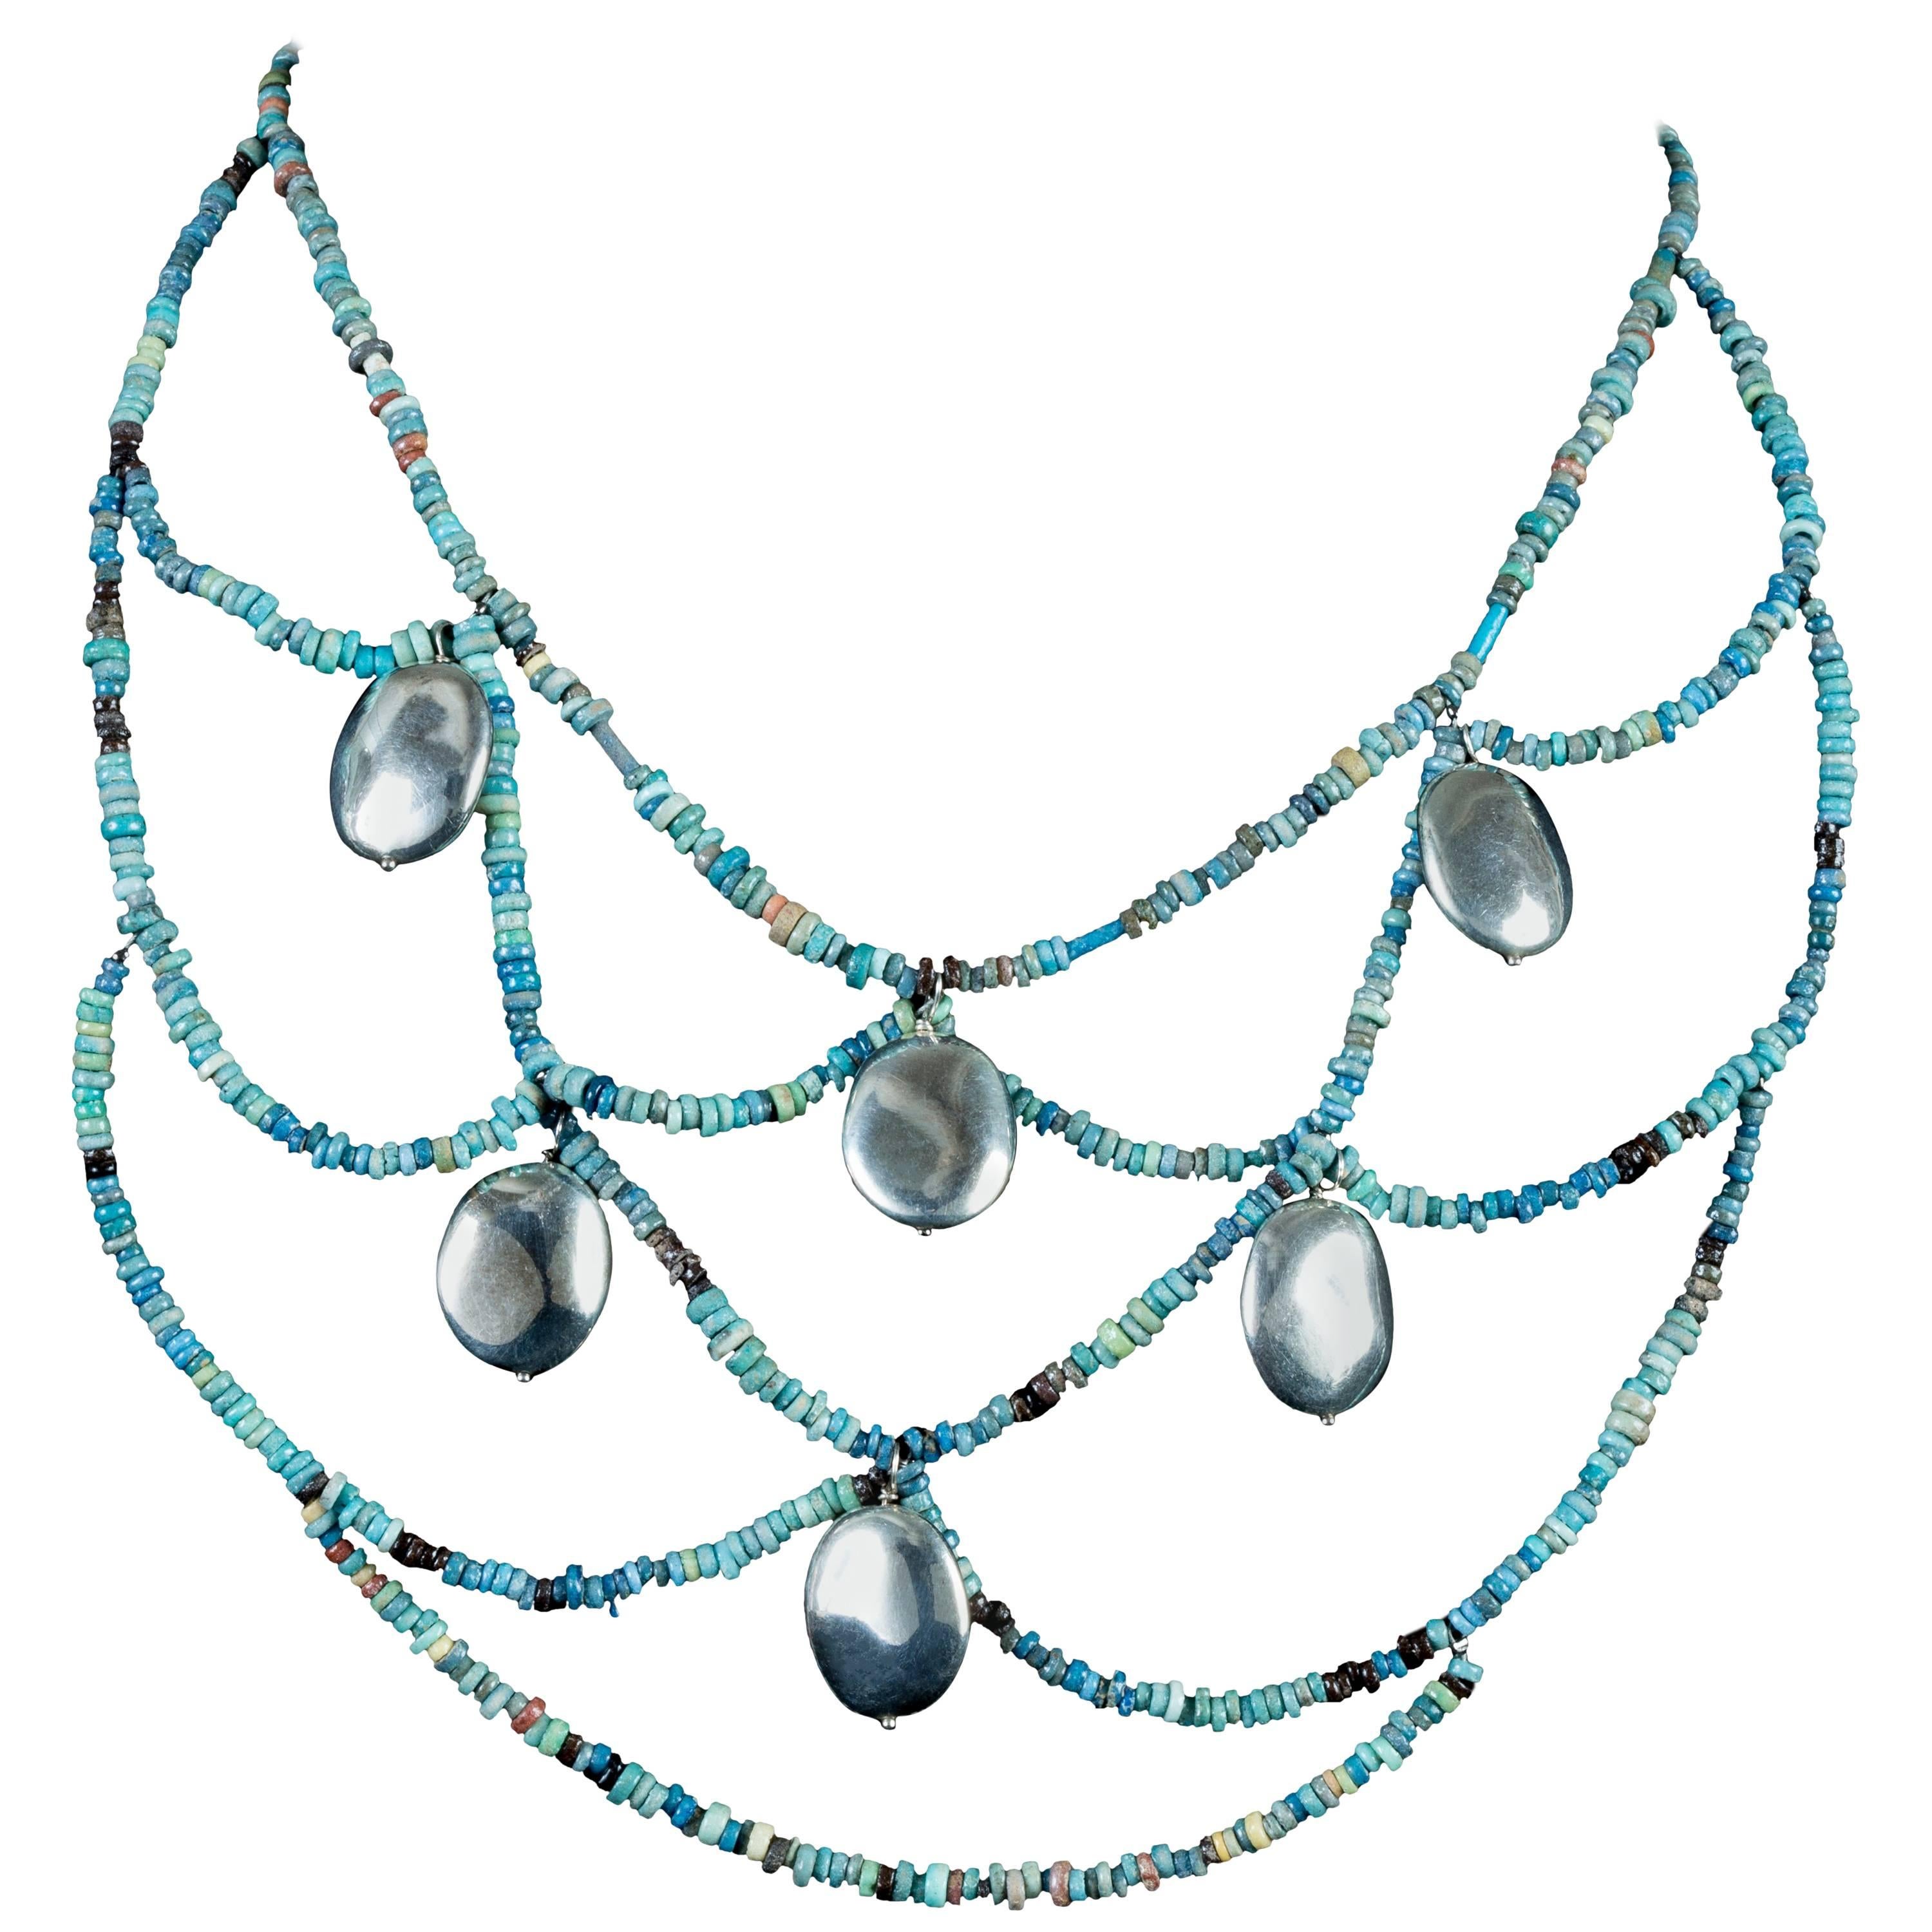 Egyptian Beads Webbed Necklace and Earrings